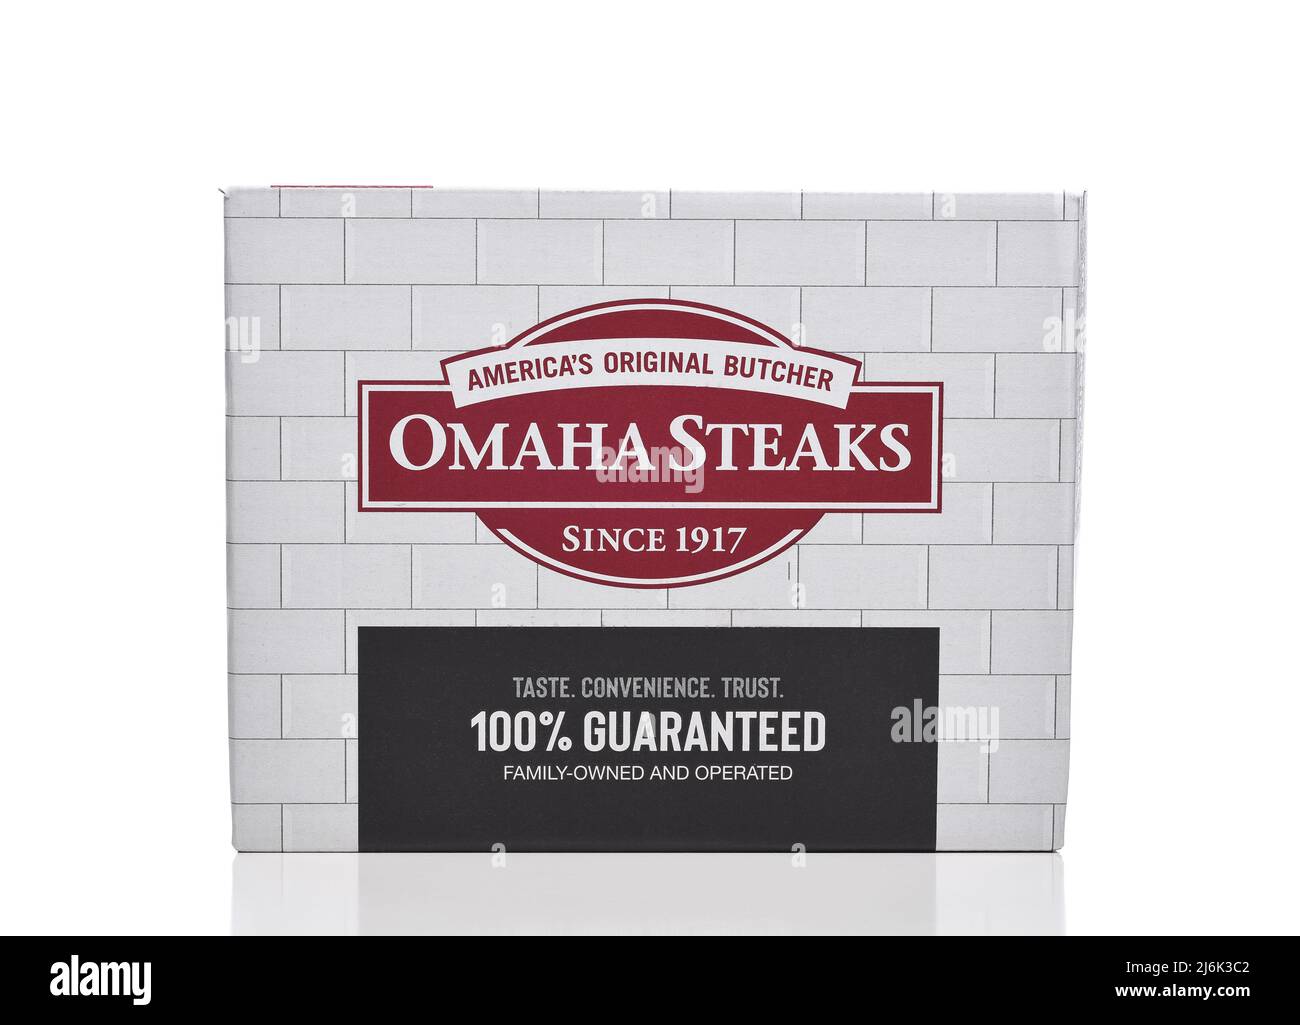 IRVINE, CALIFORNIA - 2 MAY 2022: A box of Omaha Steaks. Premium Quality Steaks, Burgers, Chicken, Seafood and more delivered to your door. Stock Photo